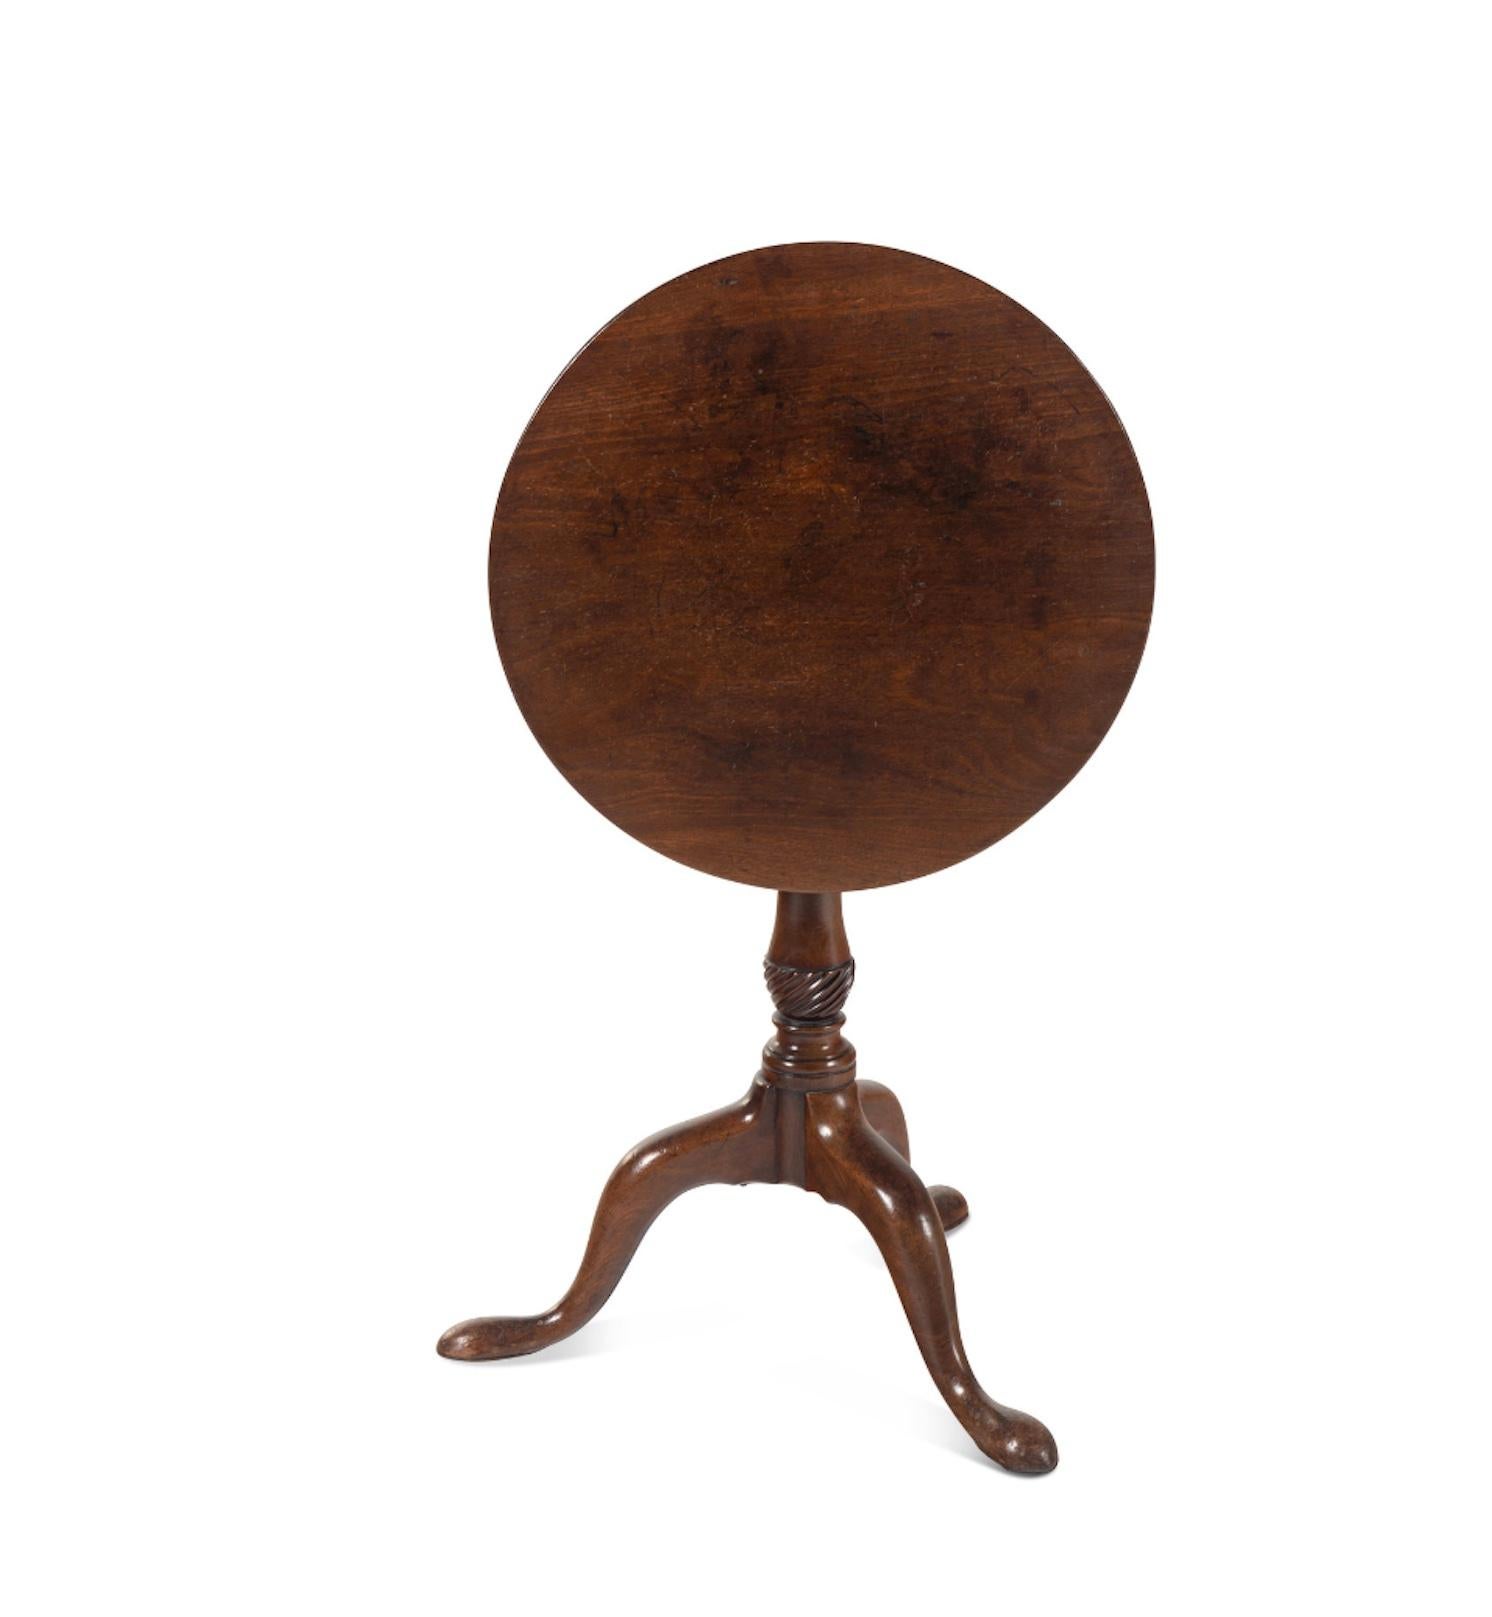 A George III Mahogany Tilt-Top Table
18th Century.  Great color and patination.
Height 26 x diameter of top 21 1/2 inches.
